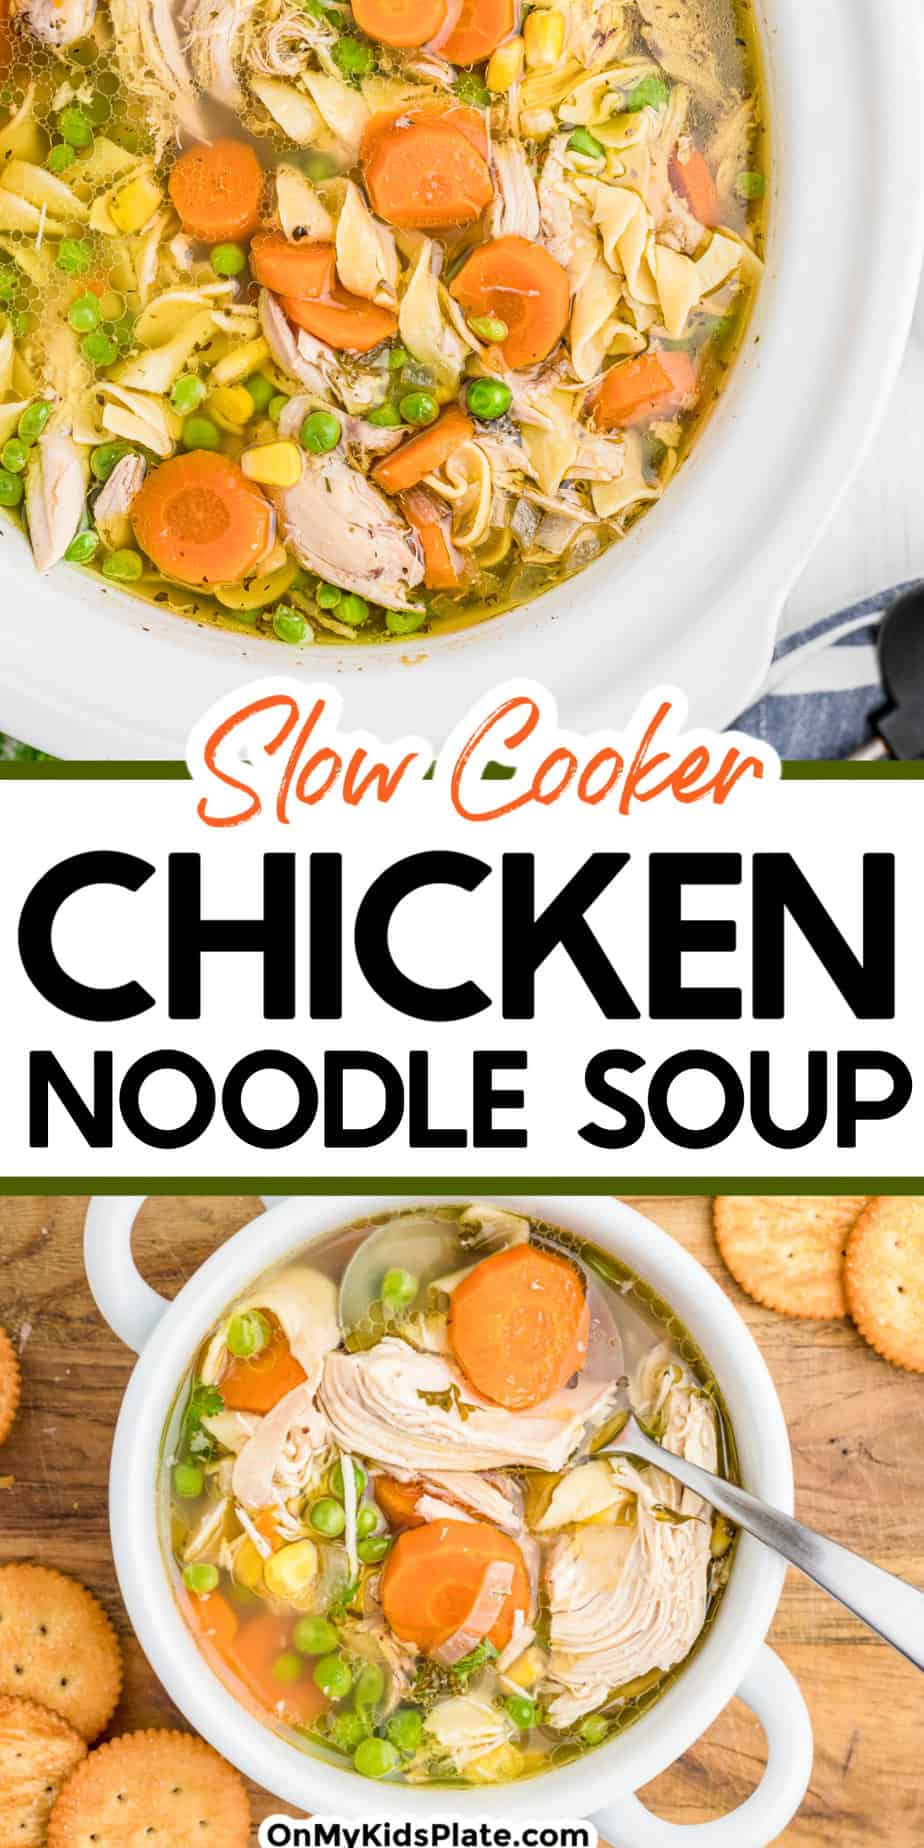 Grandma's Slow Cooker Chicken Noodle Soup - On My Kids Plate